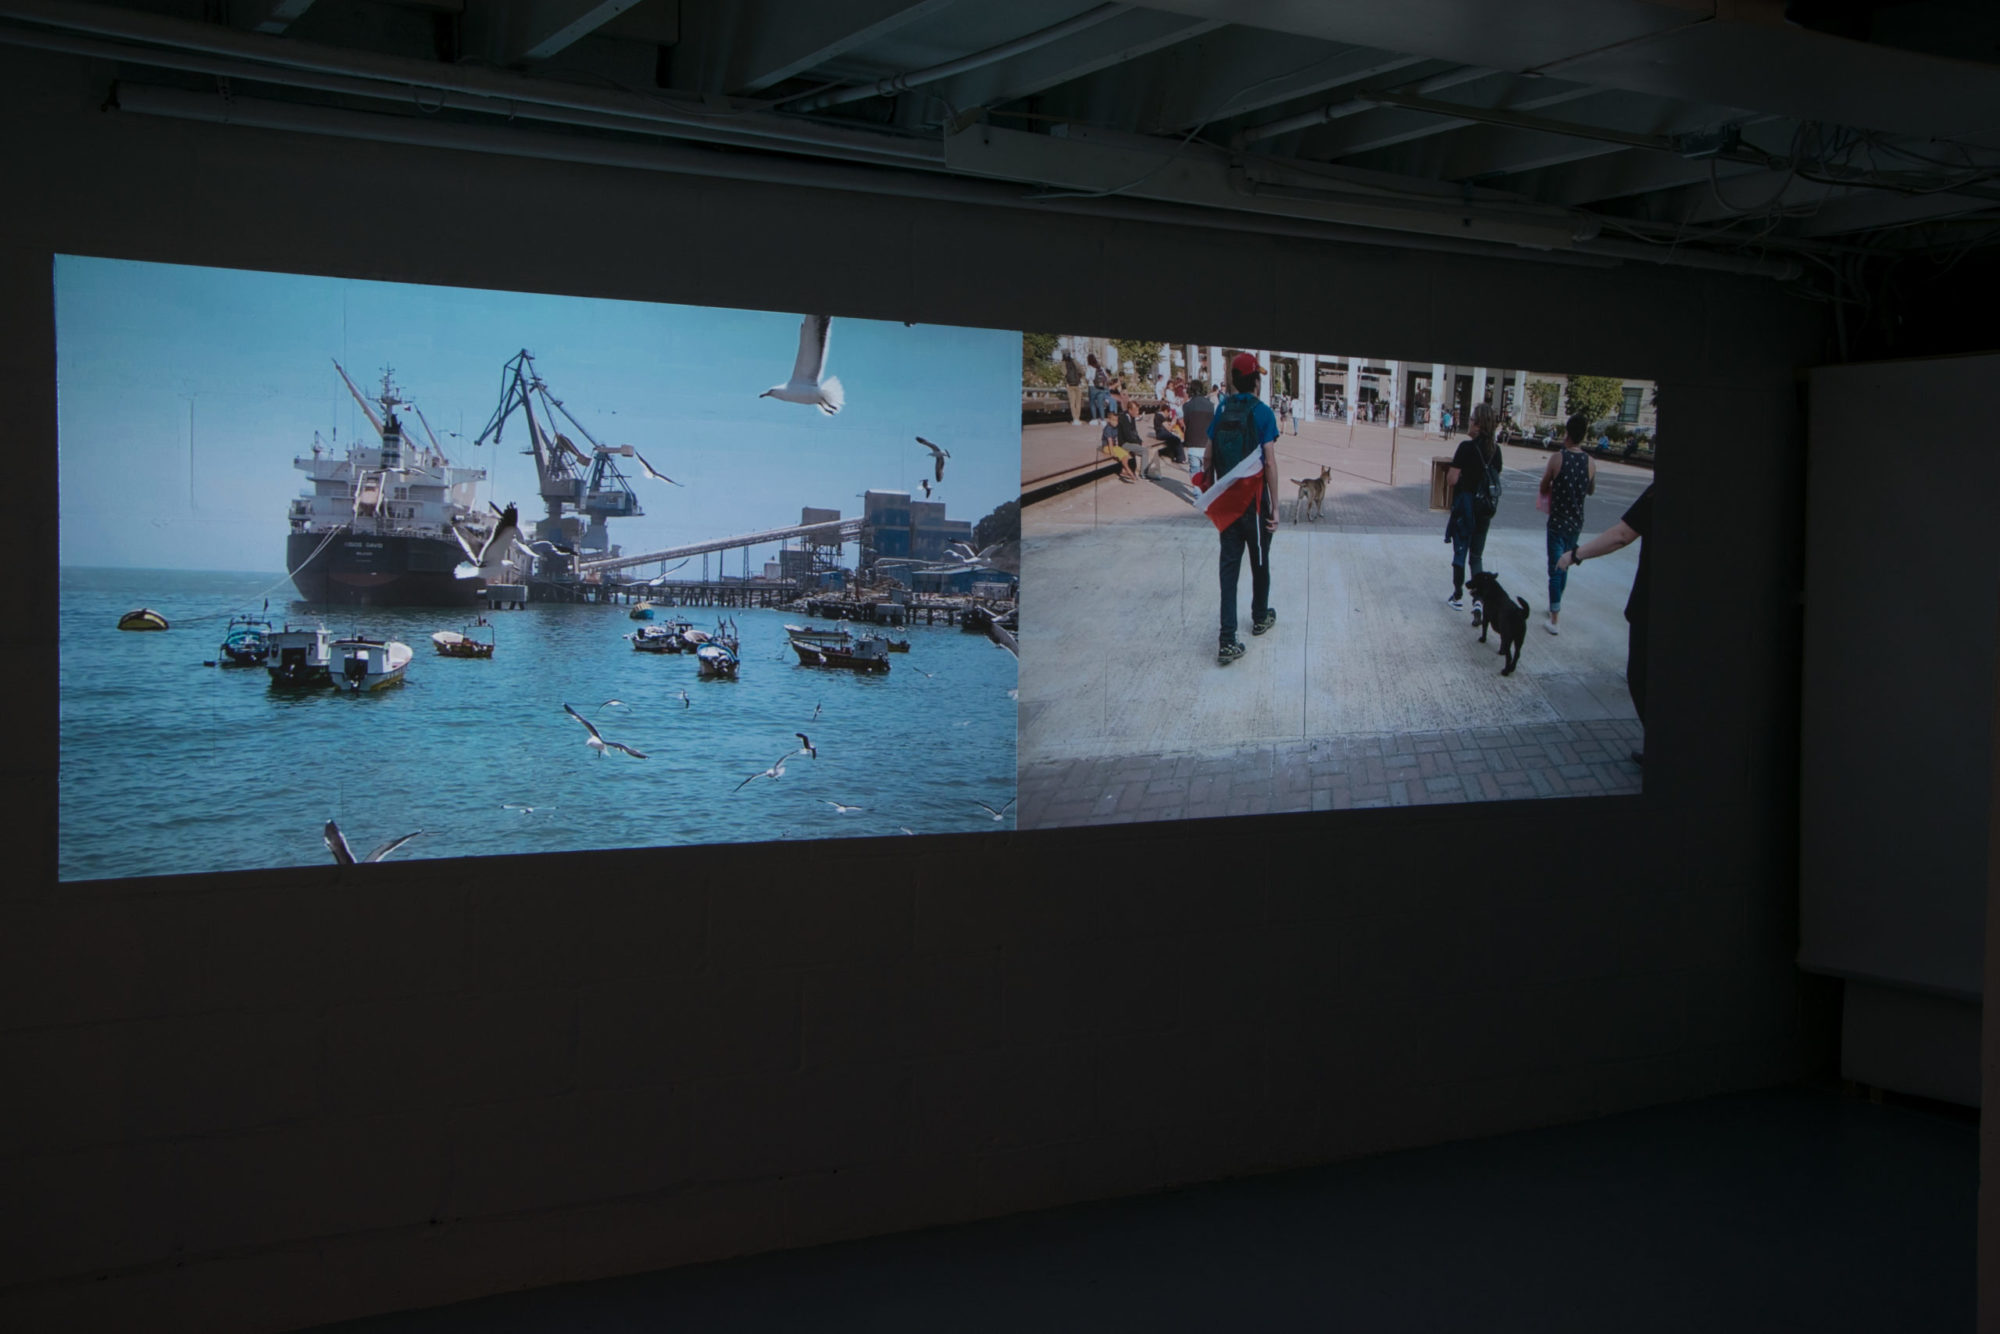 Two paneled projection of two separate films. On the left side is a shot of a large fishing vessel docked and surrounded by smaller sea boats closer to the dock. On the right side is a still of several protesters walking facing away from the camera, one with a black dog and signage.